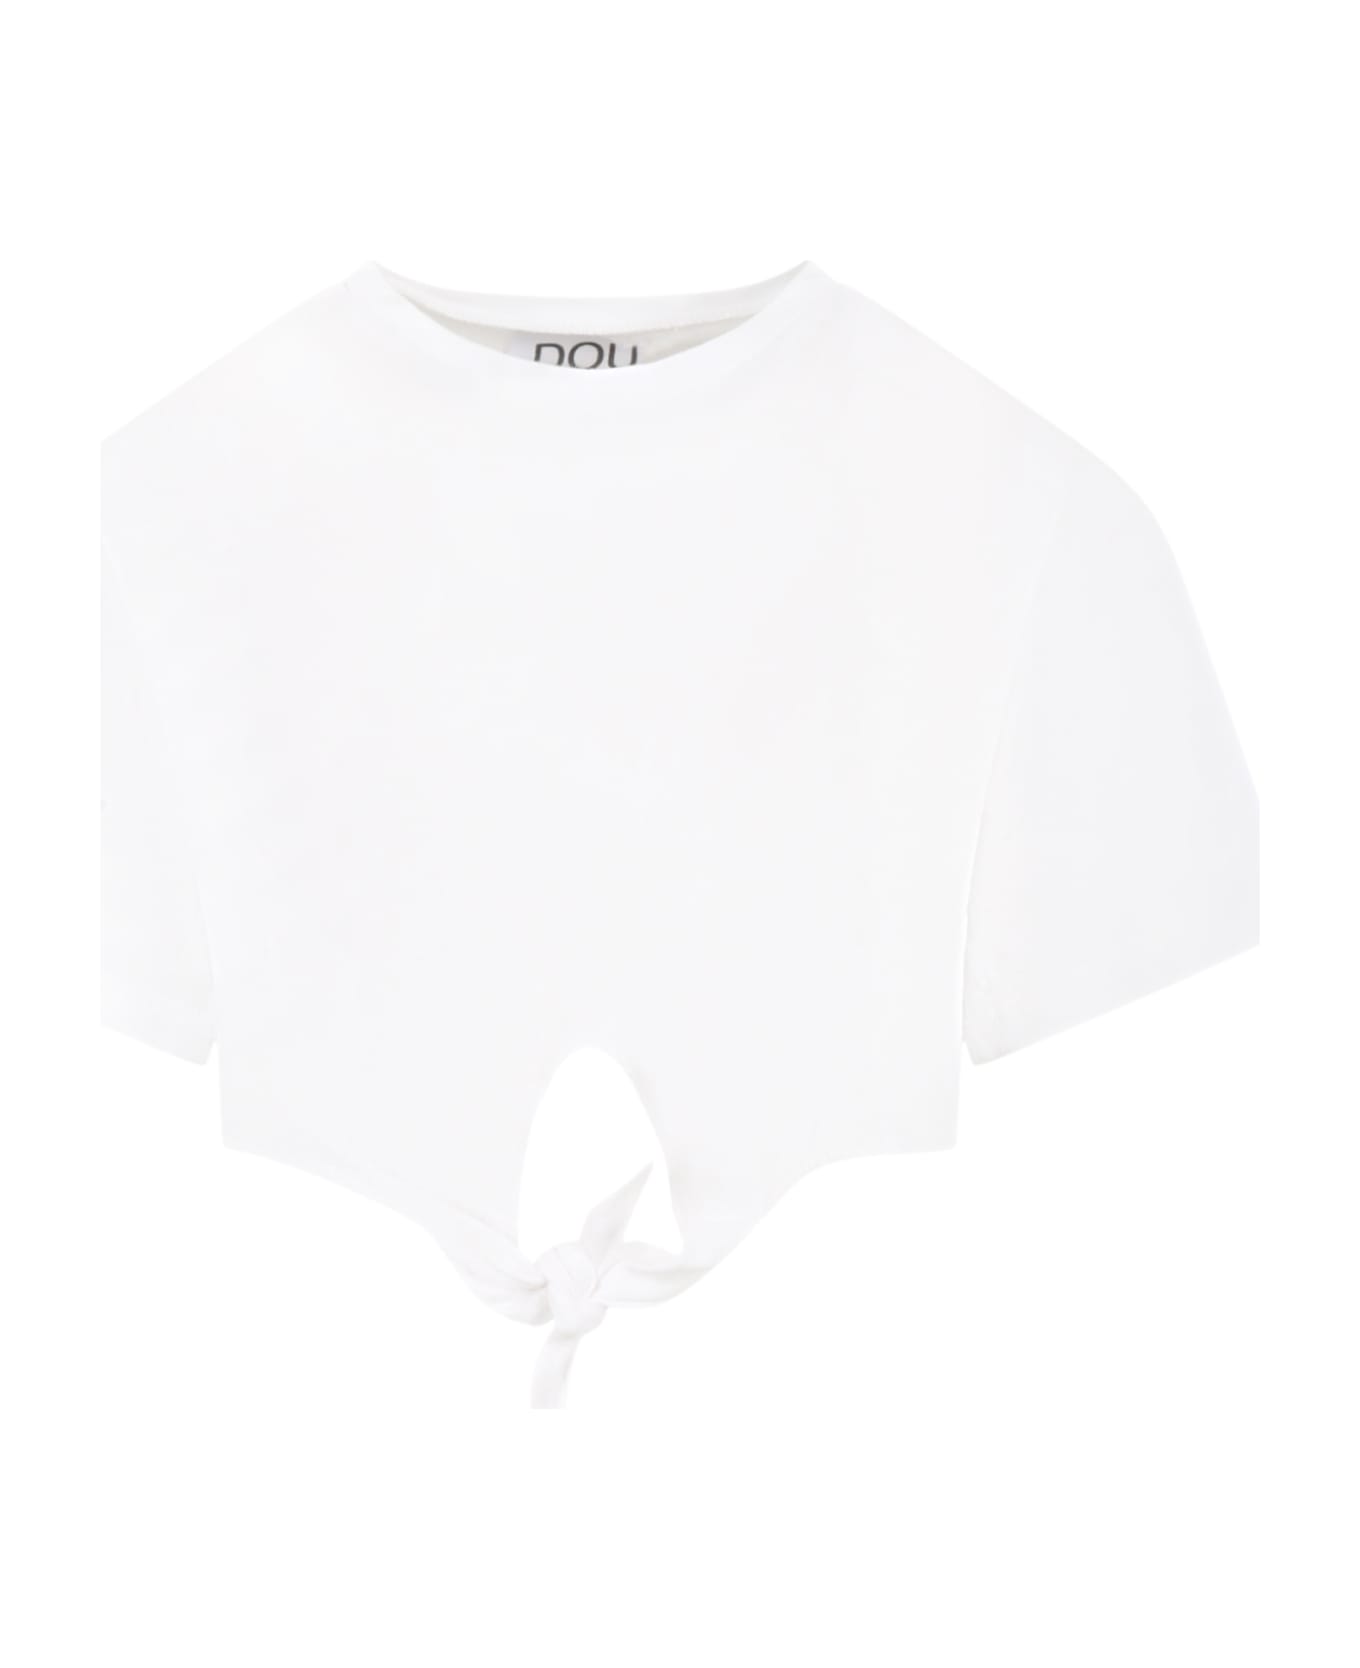 Douuod White T-shirt For Girl With Logo - White